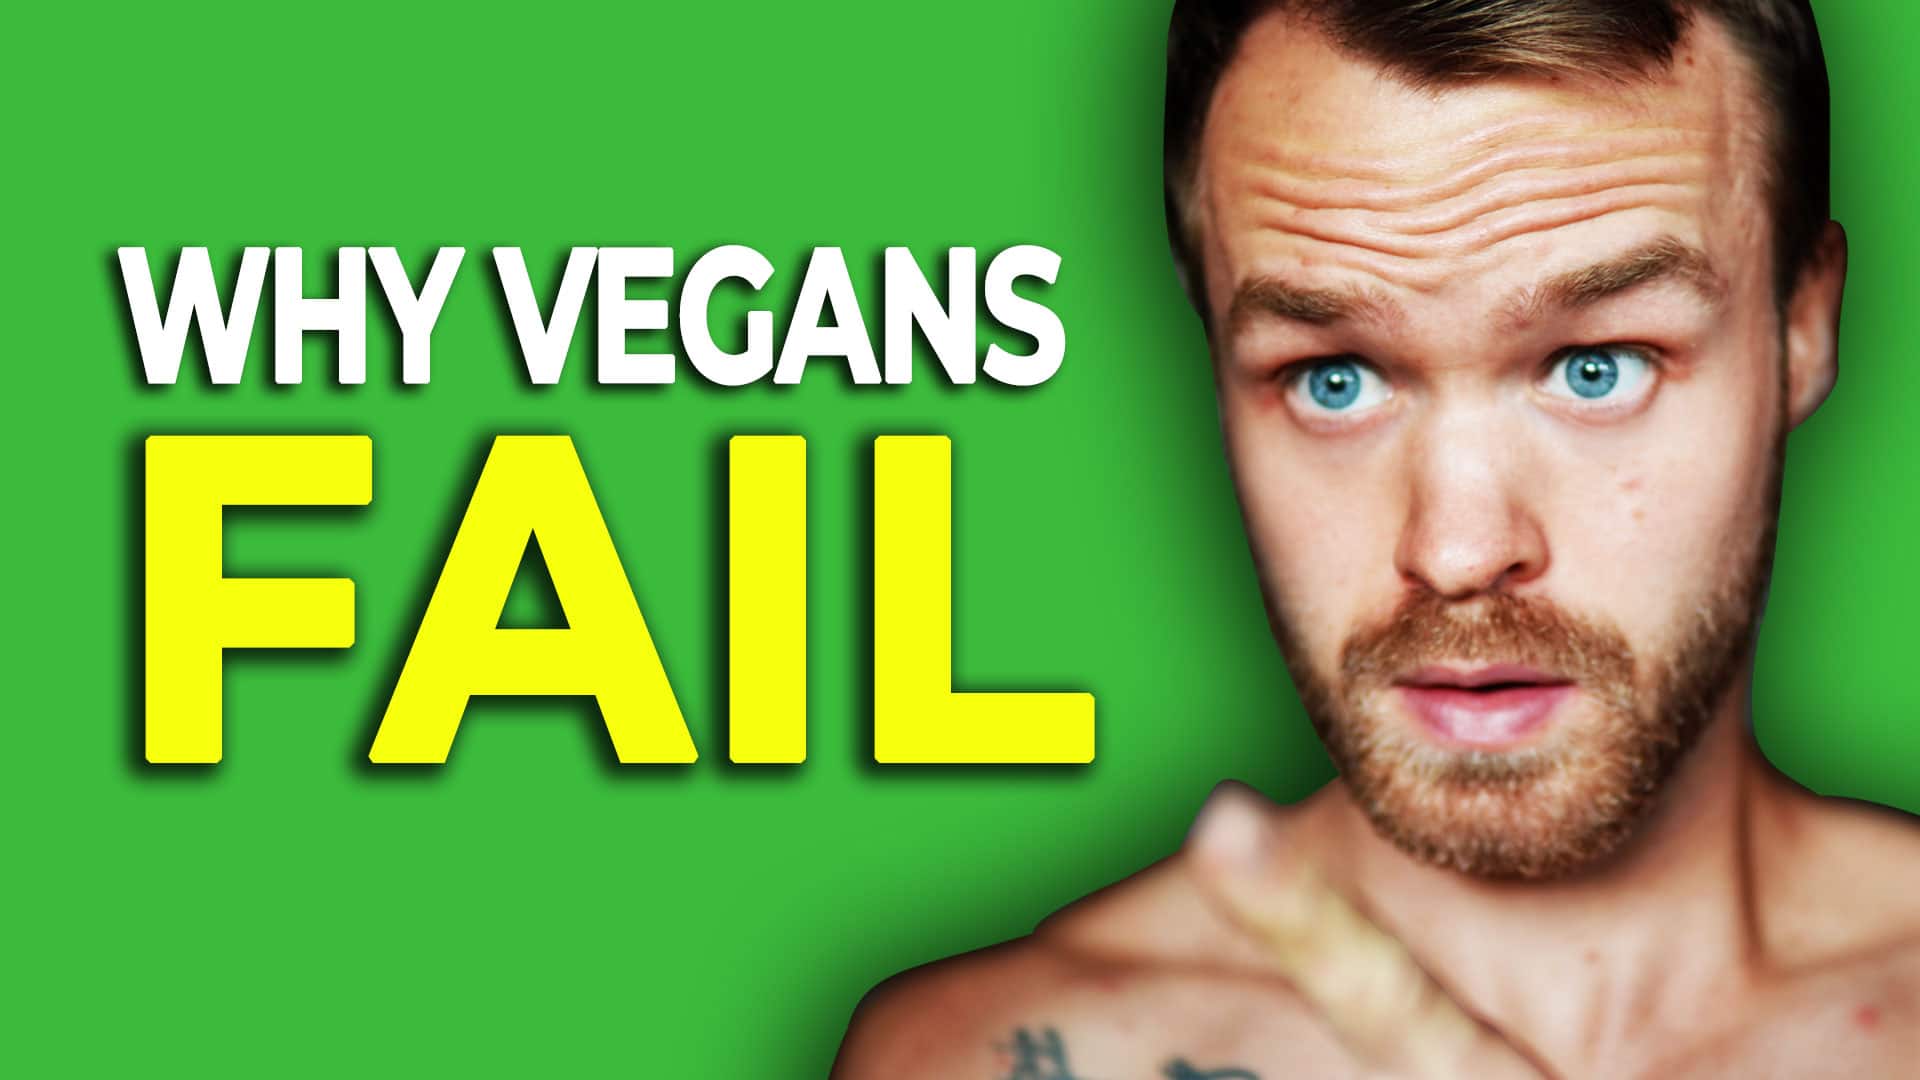 The-Most-Honest-Advice-About-Vegan-Weight-Loss